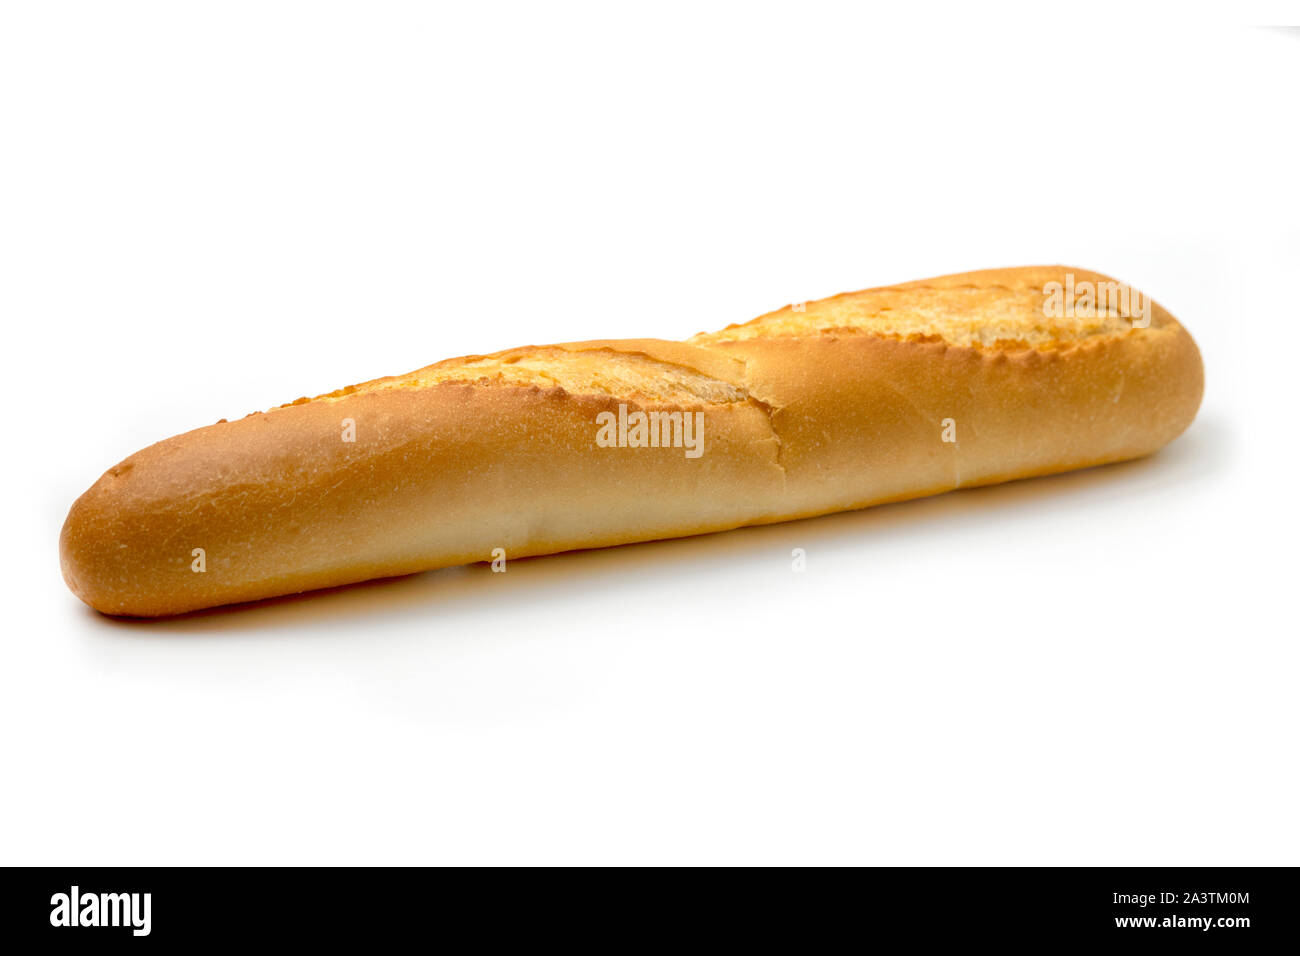 Baguette on a white background Stock Photo